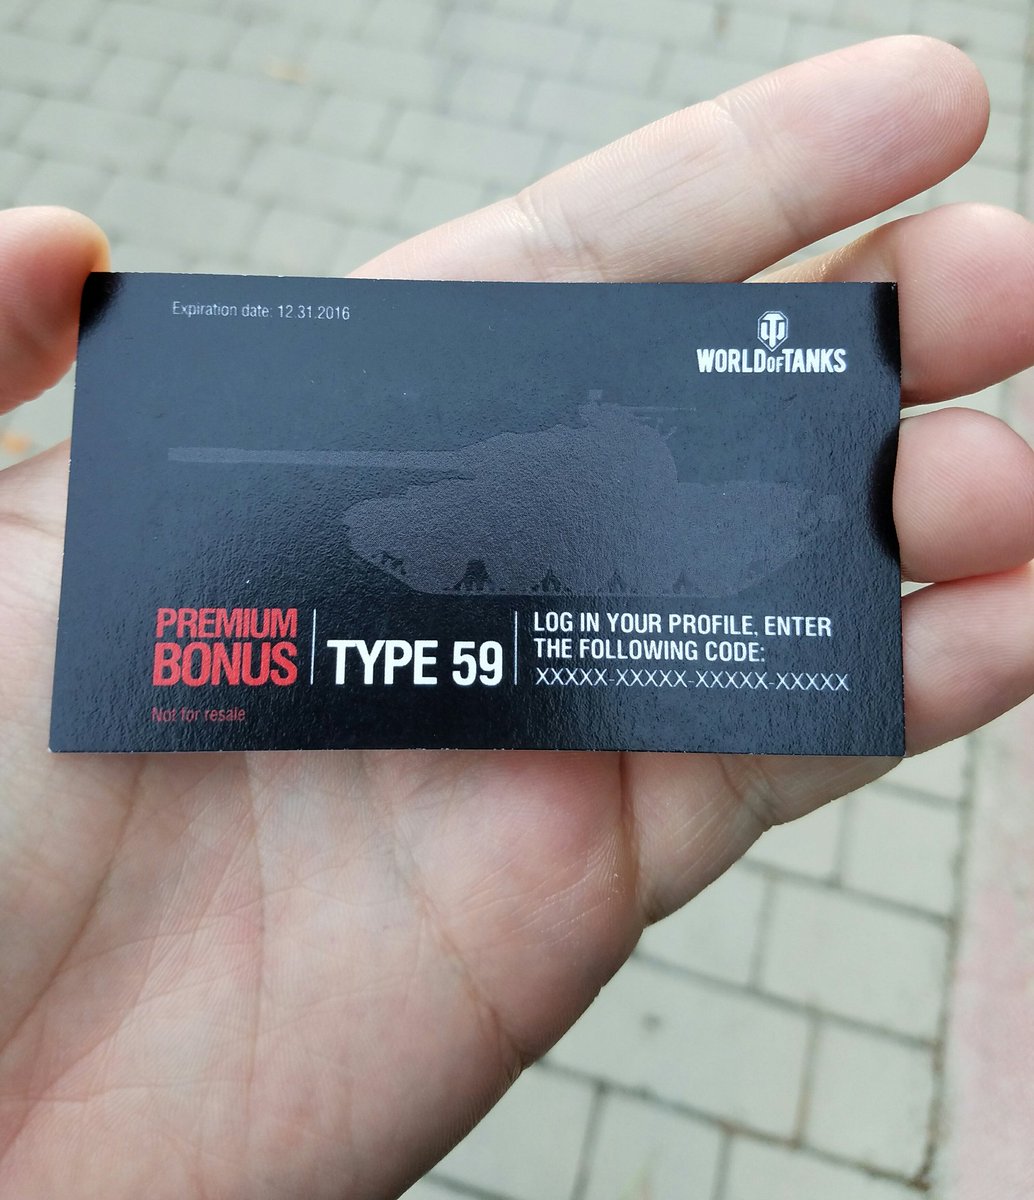 Found this in my pocket. Who wants it? Comment and Retweet to enter. #worldoftanks